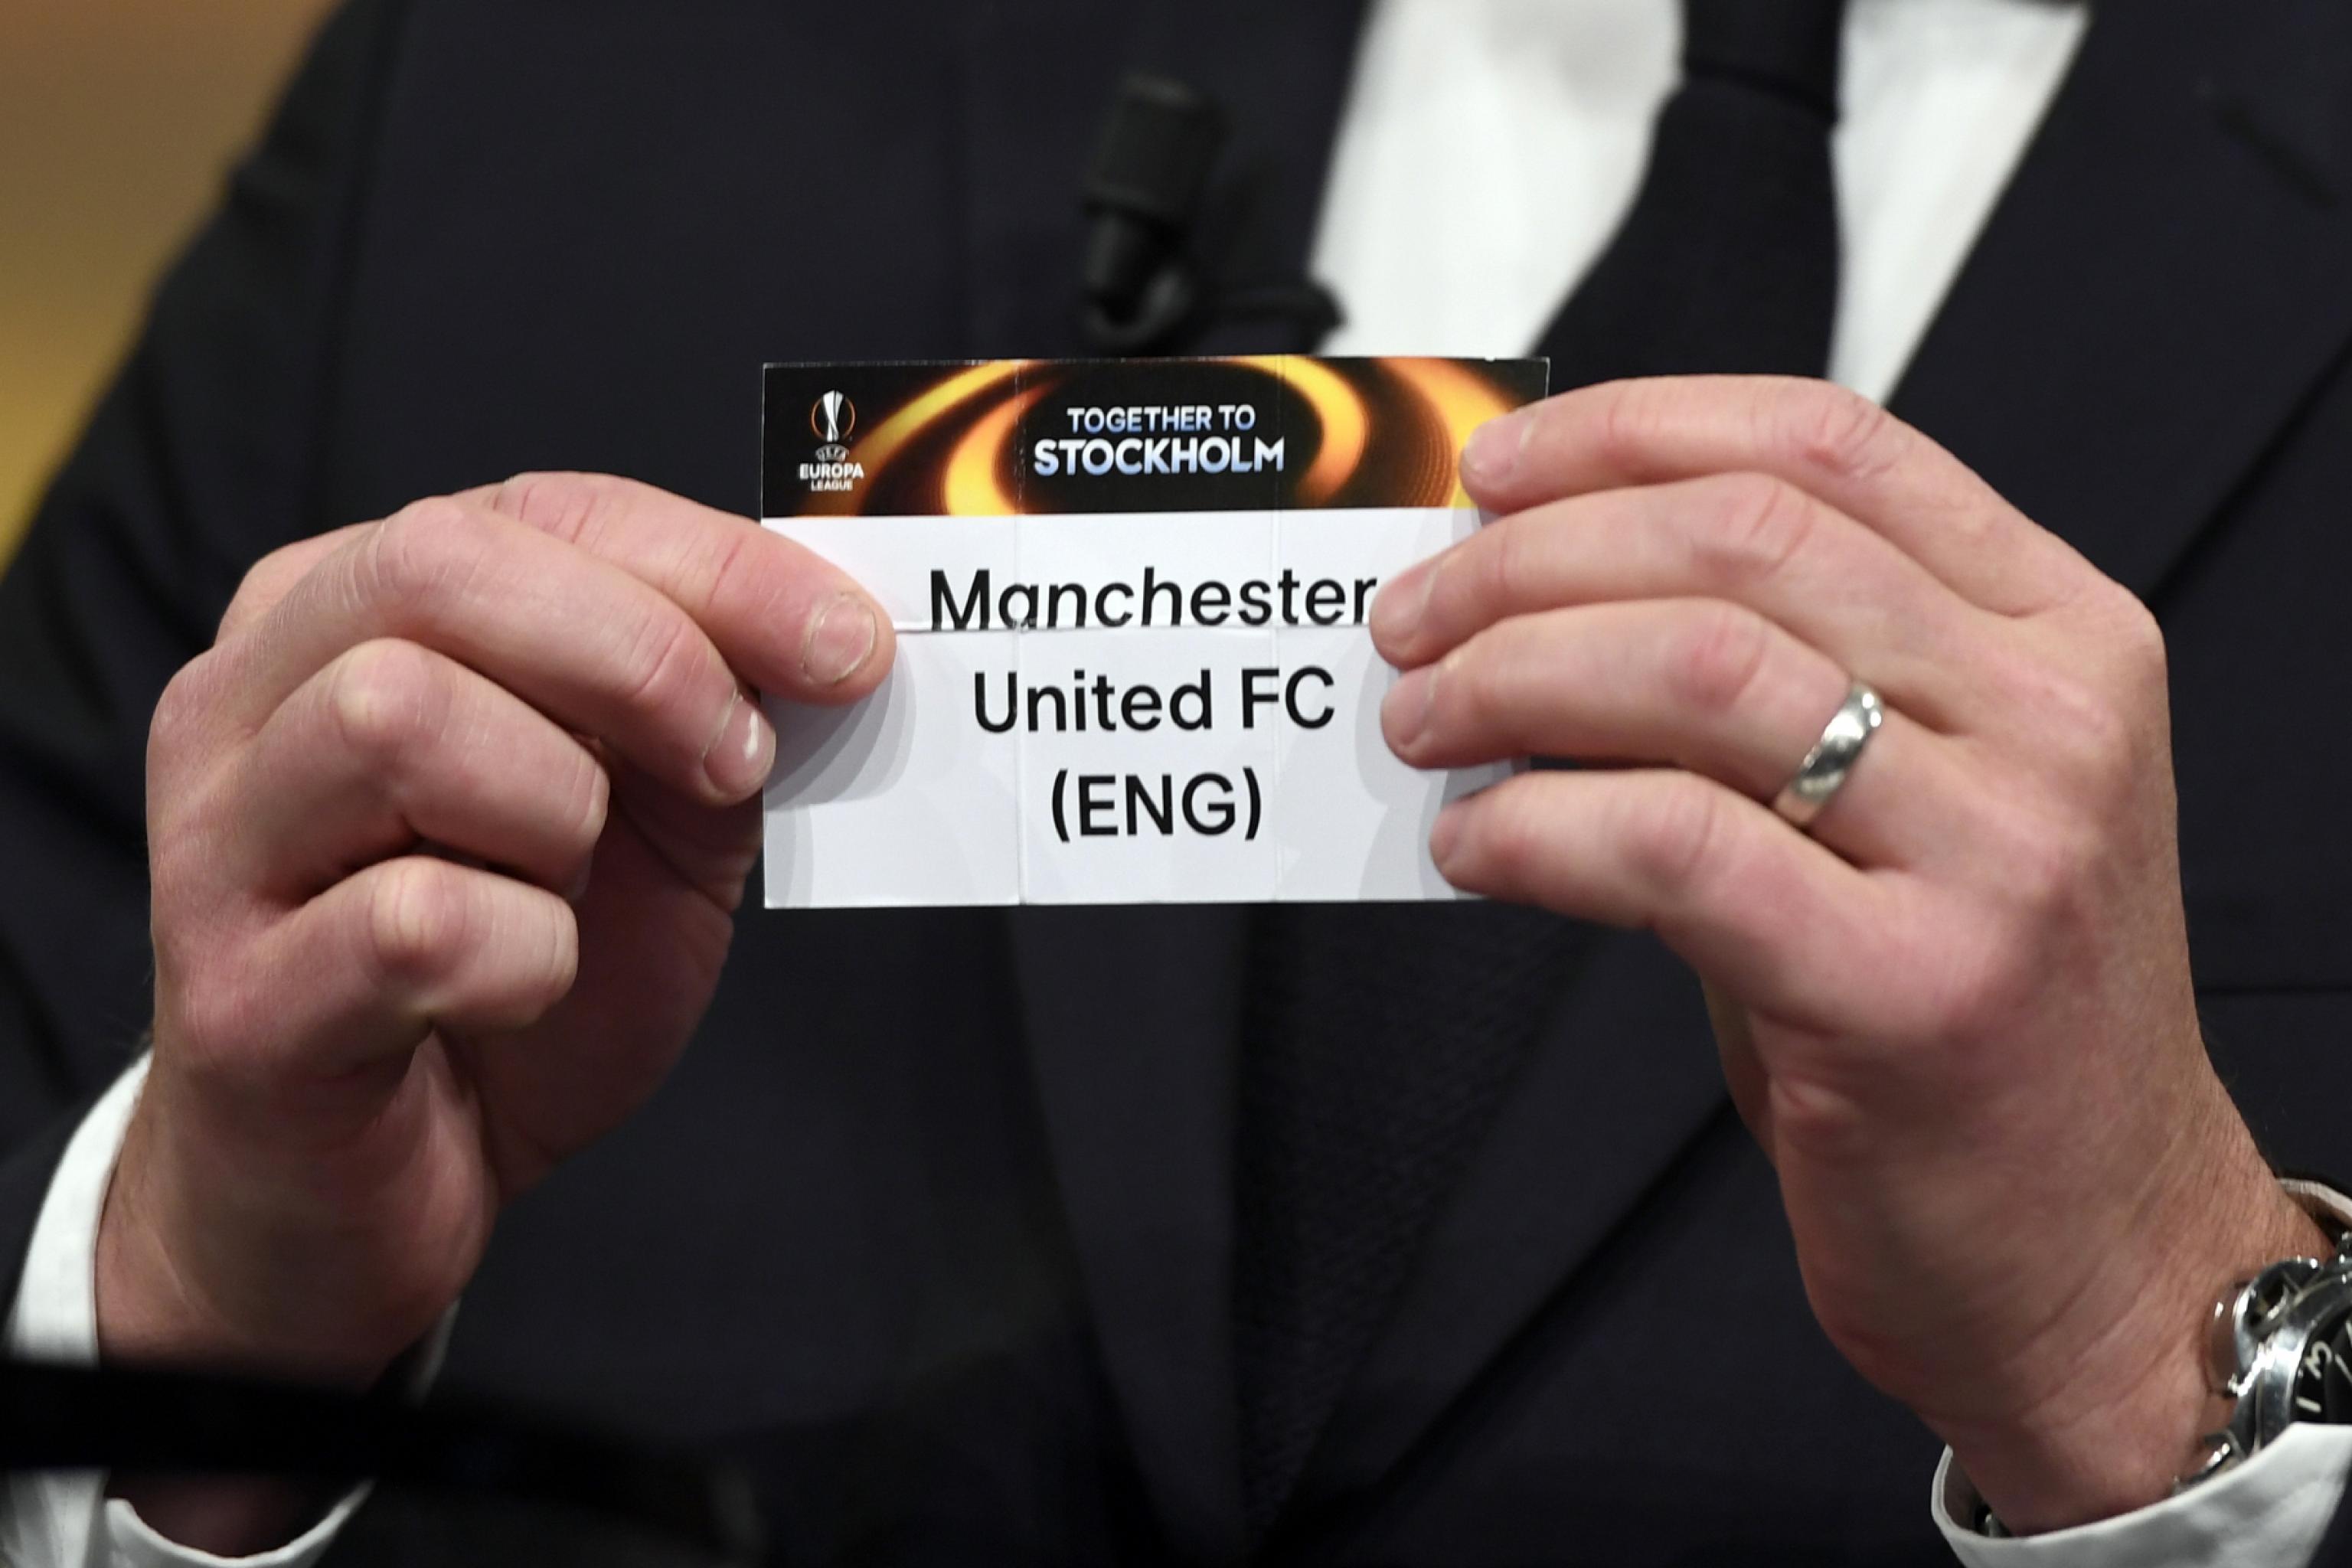 Europa League Draw 2020 Schedule Of Dates For Round Of 16